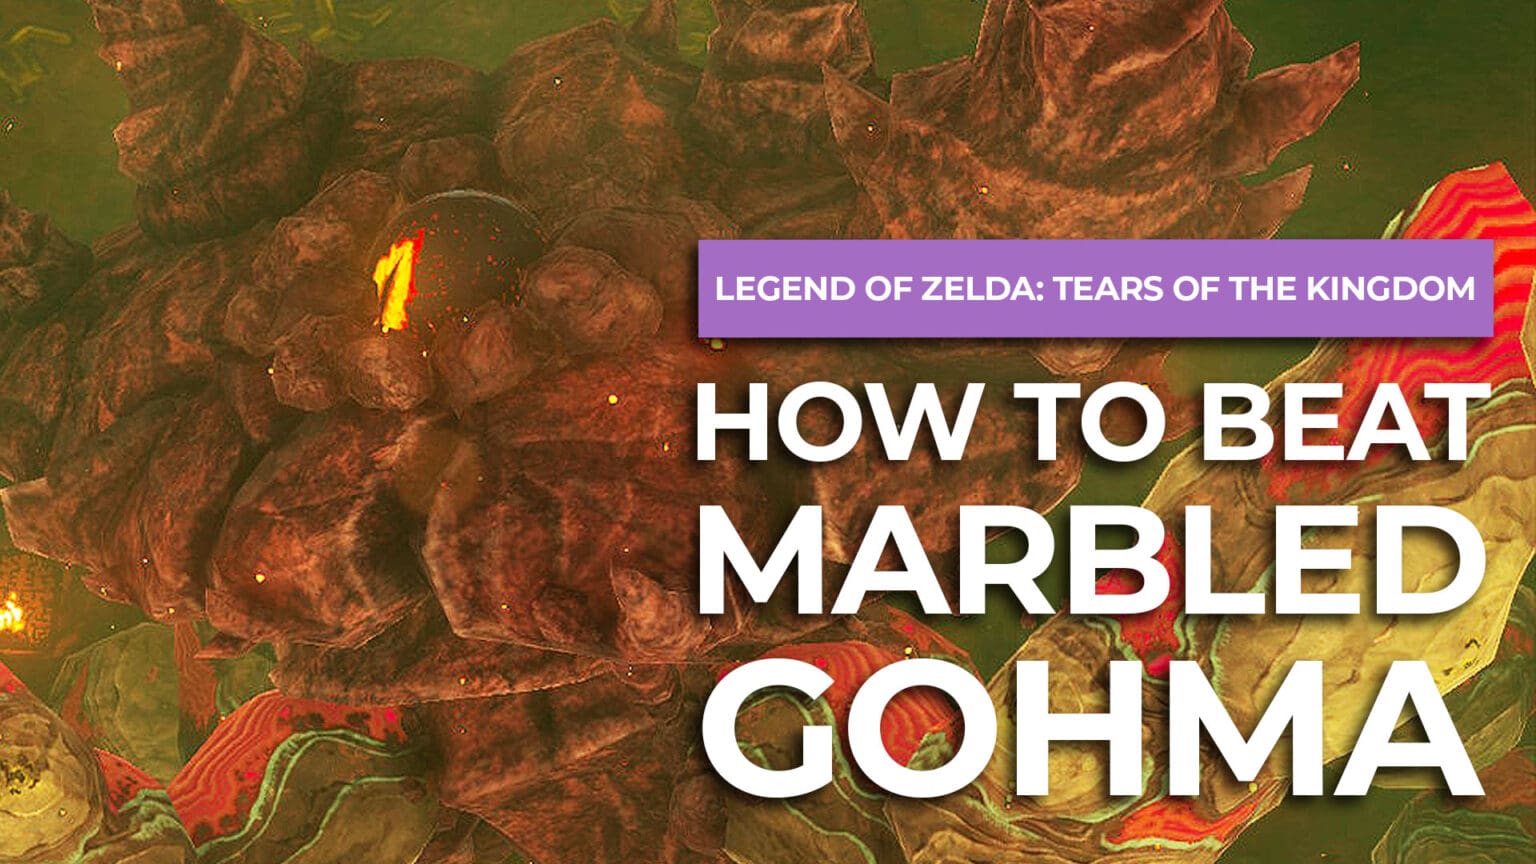 How To Beat Marbled Gohma In Zelda Tears Of The Kingdom Archives ...